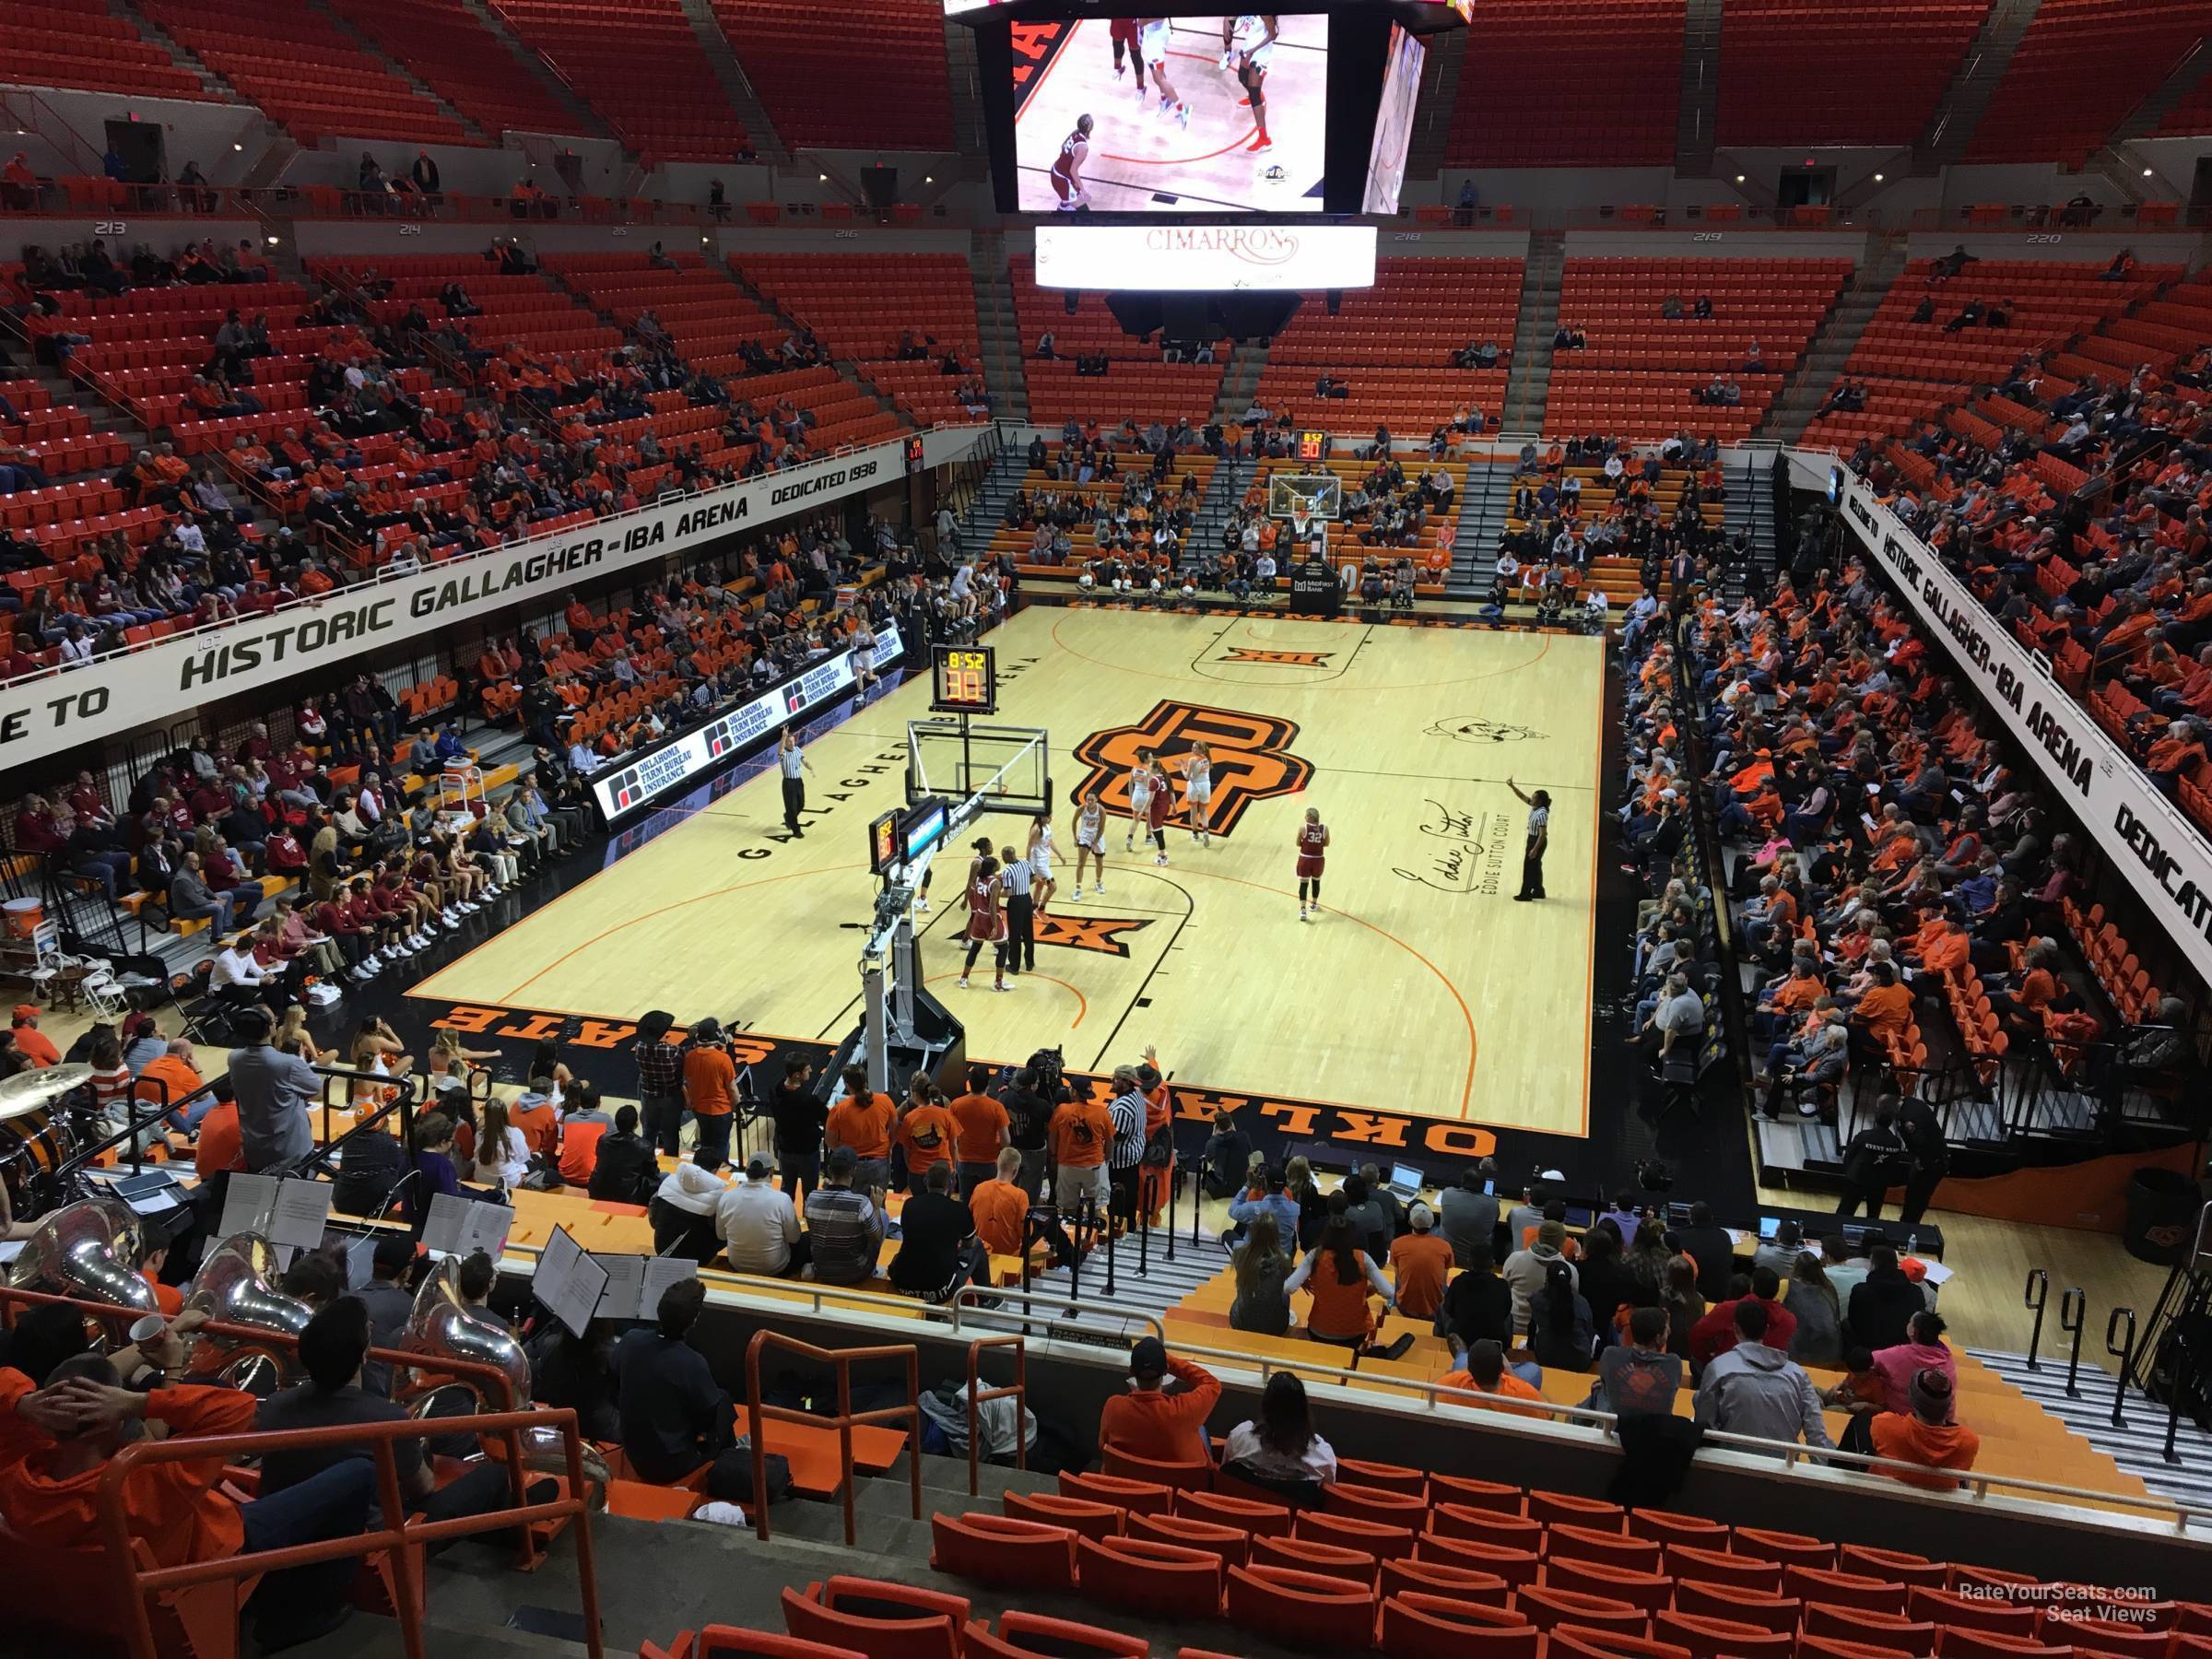 section 207, row 13 seat view  - gallagher-iba arena